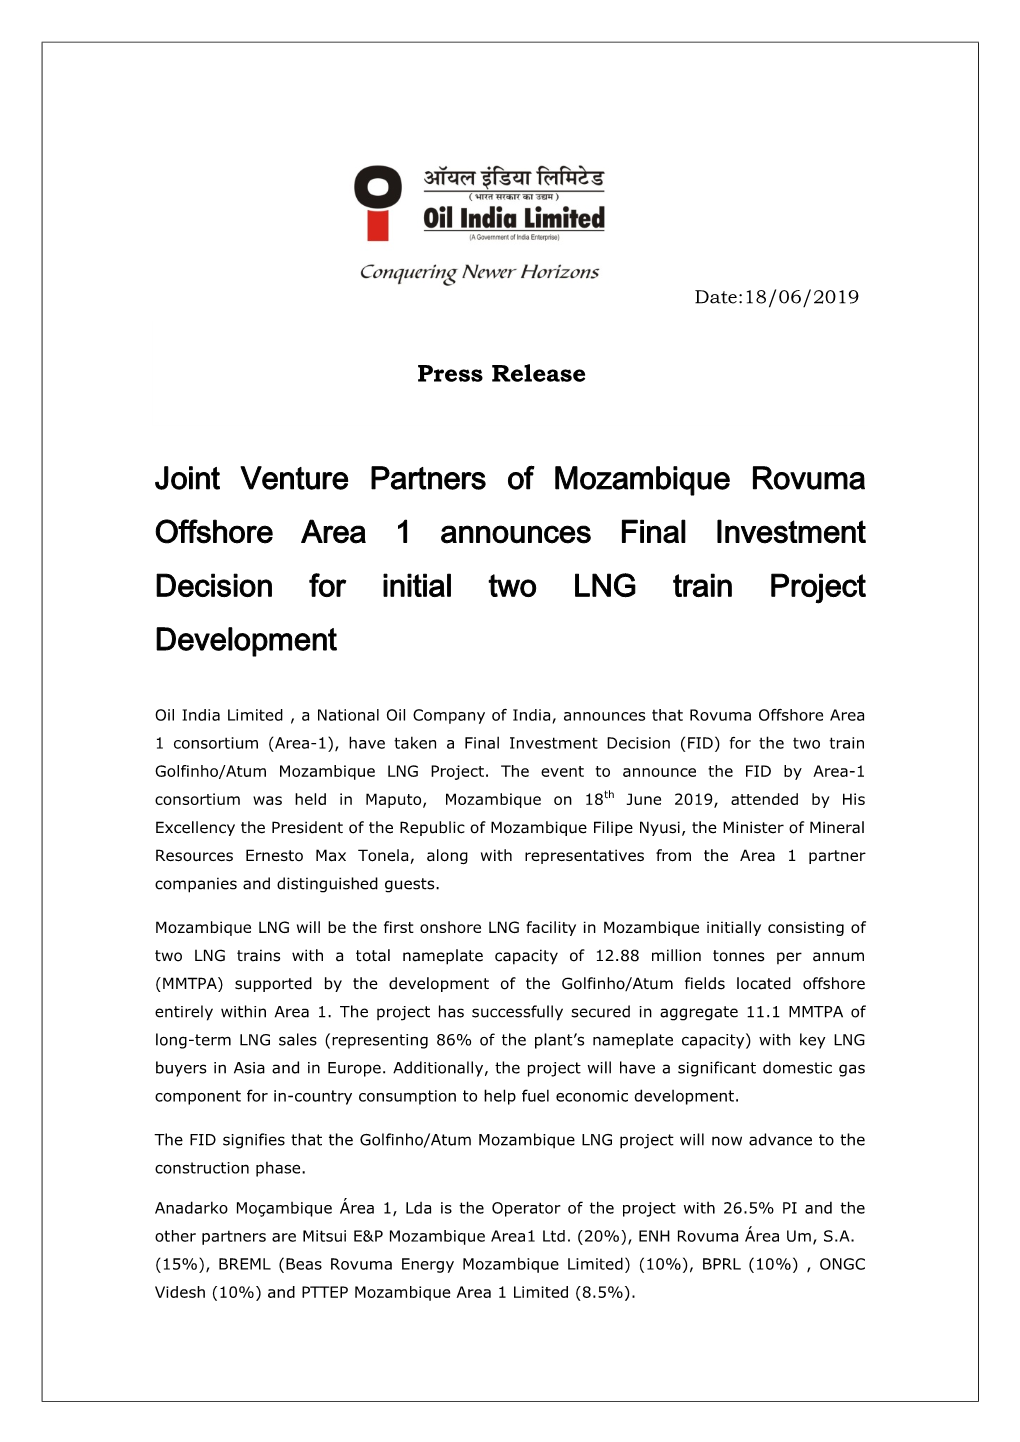 Joint Venture Partners of Mozambique Rovuma Offshore Area 1 Announces Final Investment Decision for Initial Two LNG Train Project